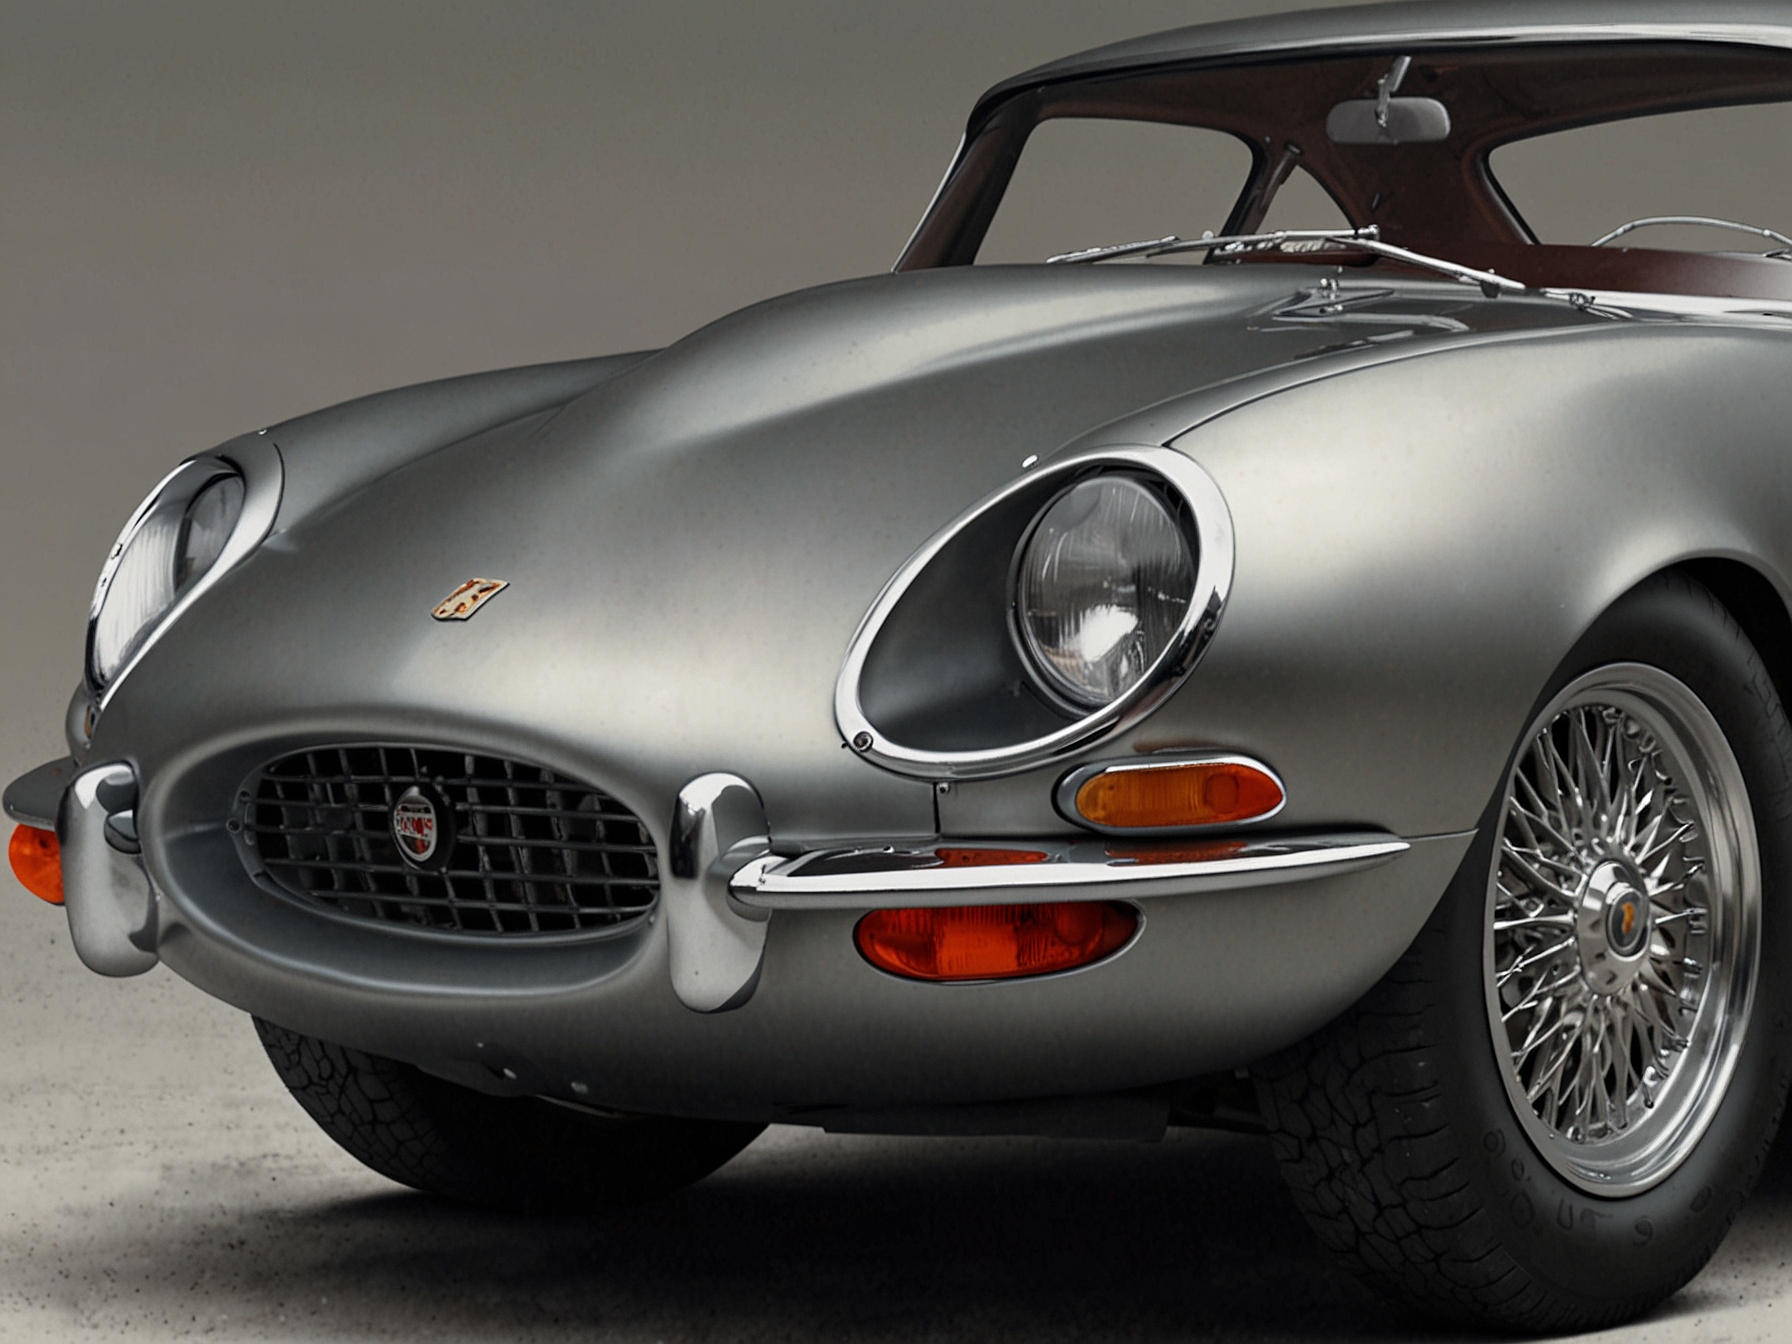 A front-side view of the re-created 1964 Jaguar E-Type Low-Drag Coupe in metallic silver, showcasing its sleek and aerodynamic design, reminiscent of classic racing cars from the 1960s.